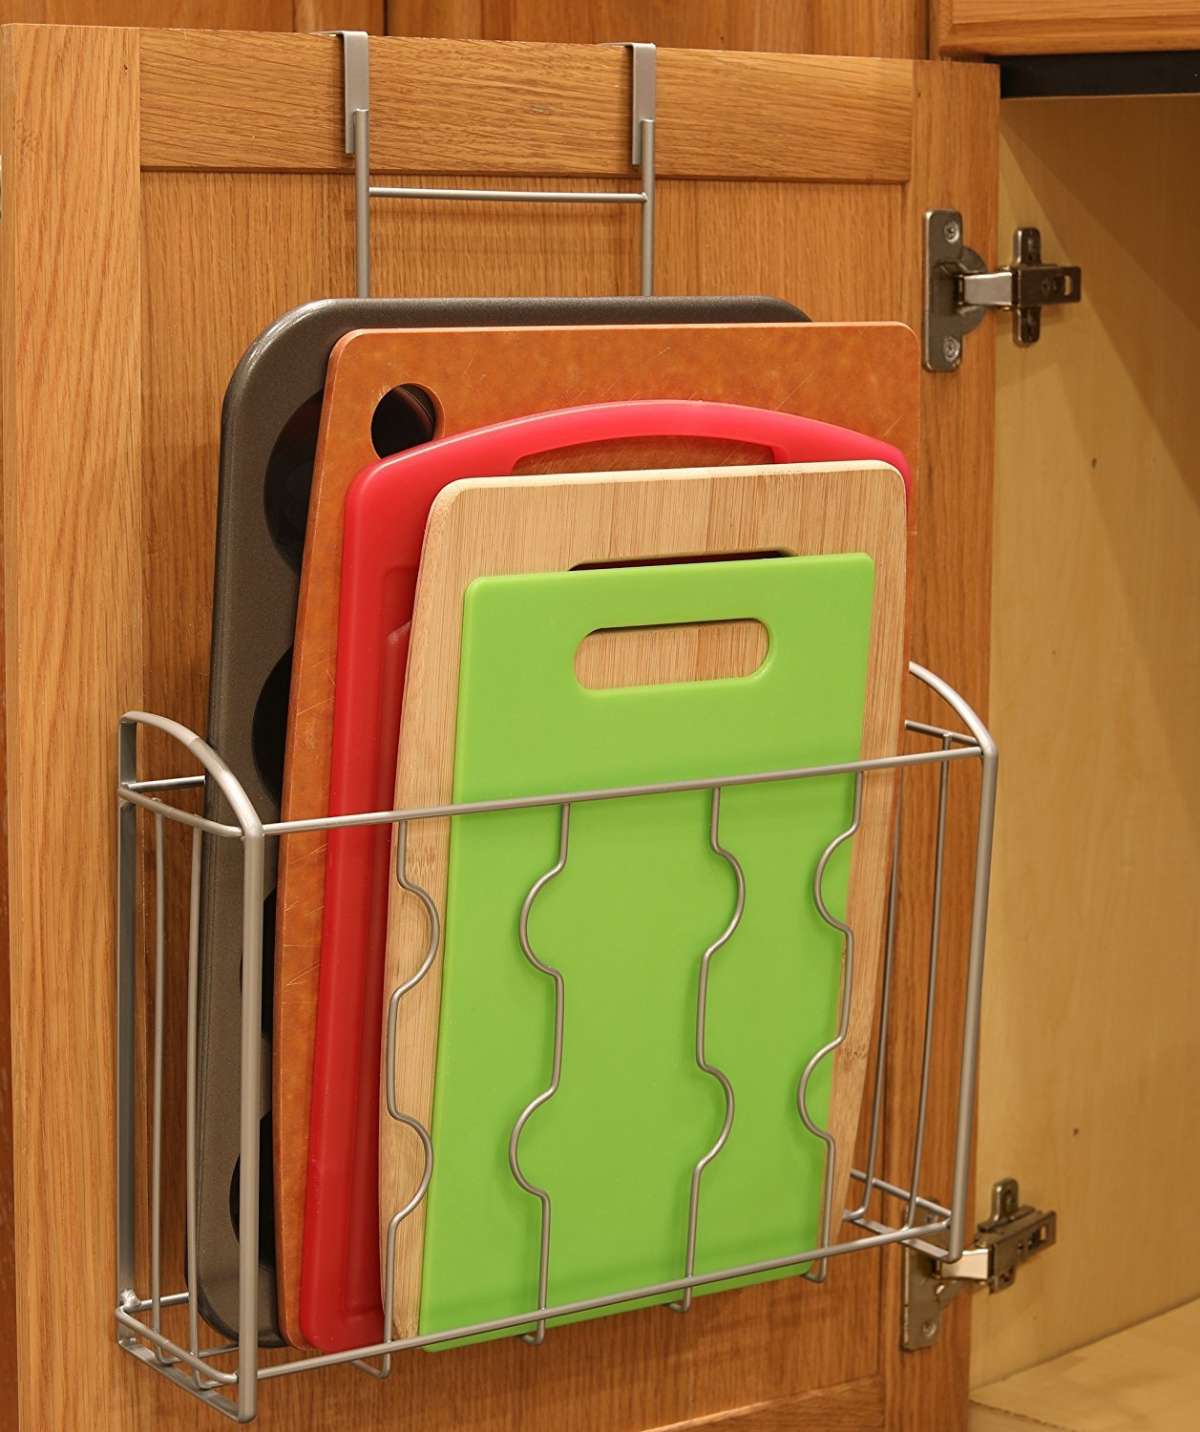 Over-the-cabinet kitchen storage for cutting boards